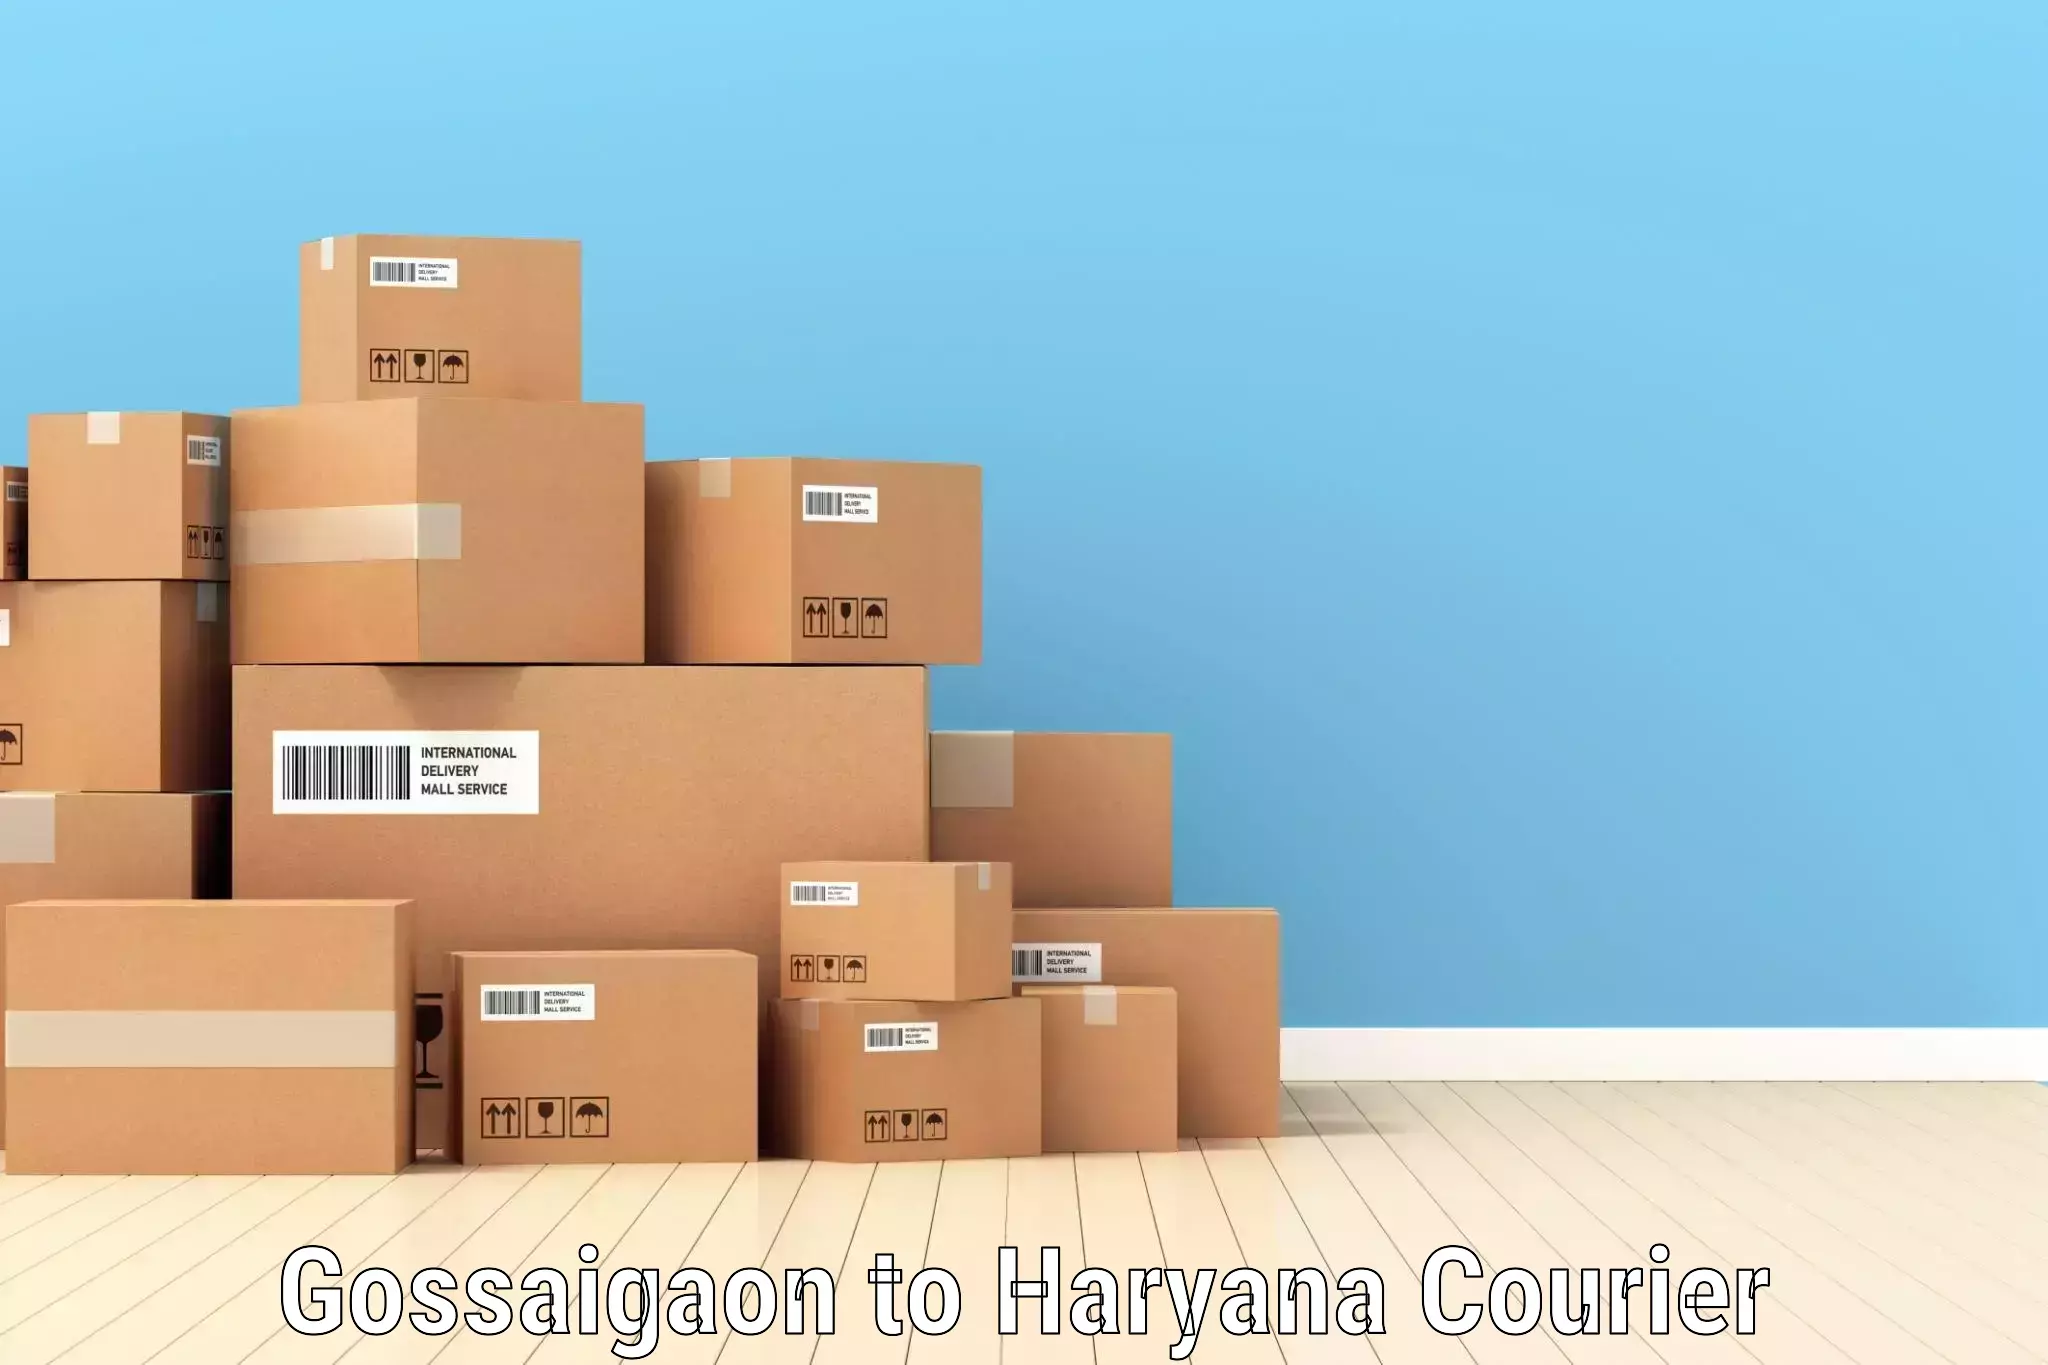 State-of-the-art courier technology Gossaigaon to Bilaspur Haryana